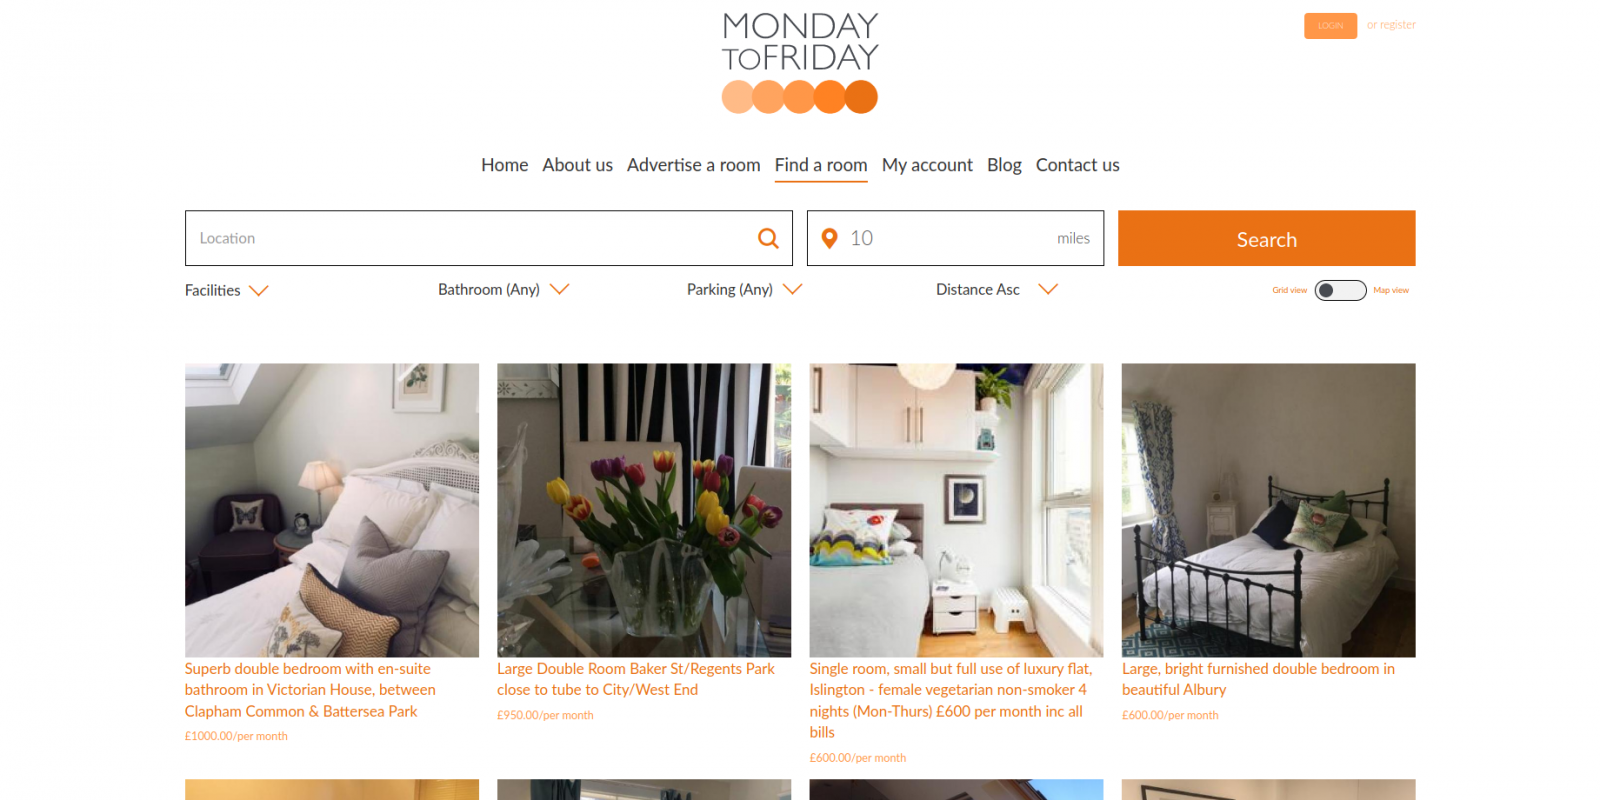 Monday to Friday room rental website - room search page